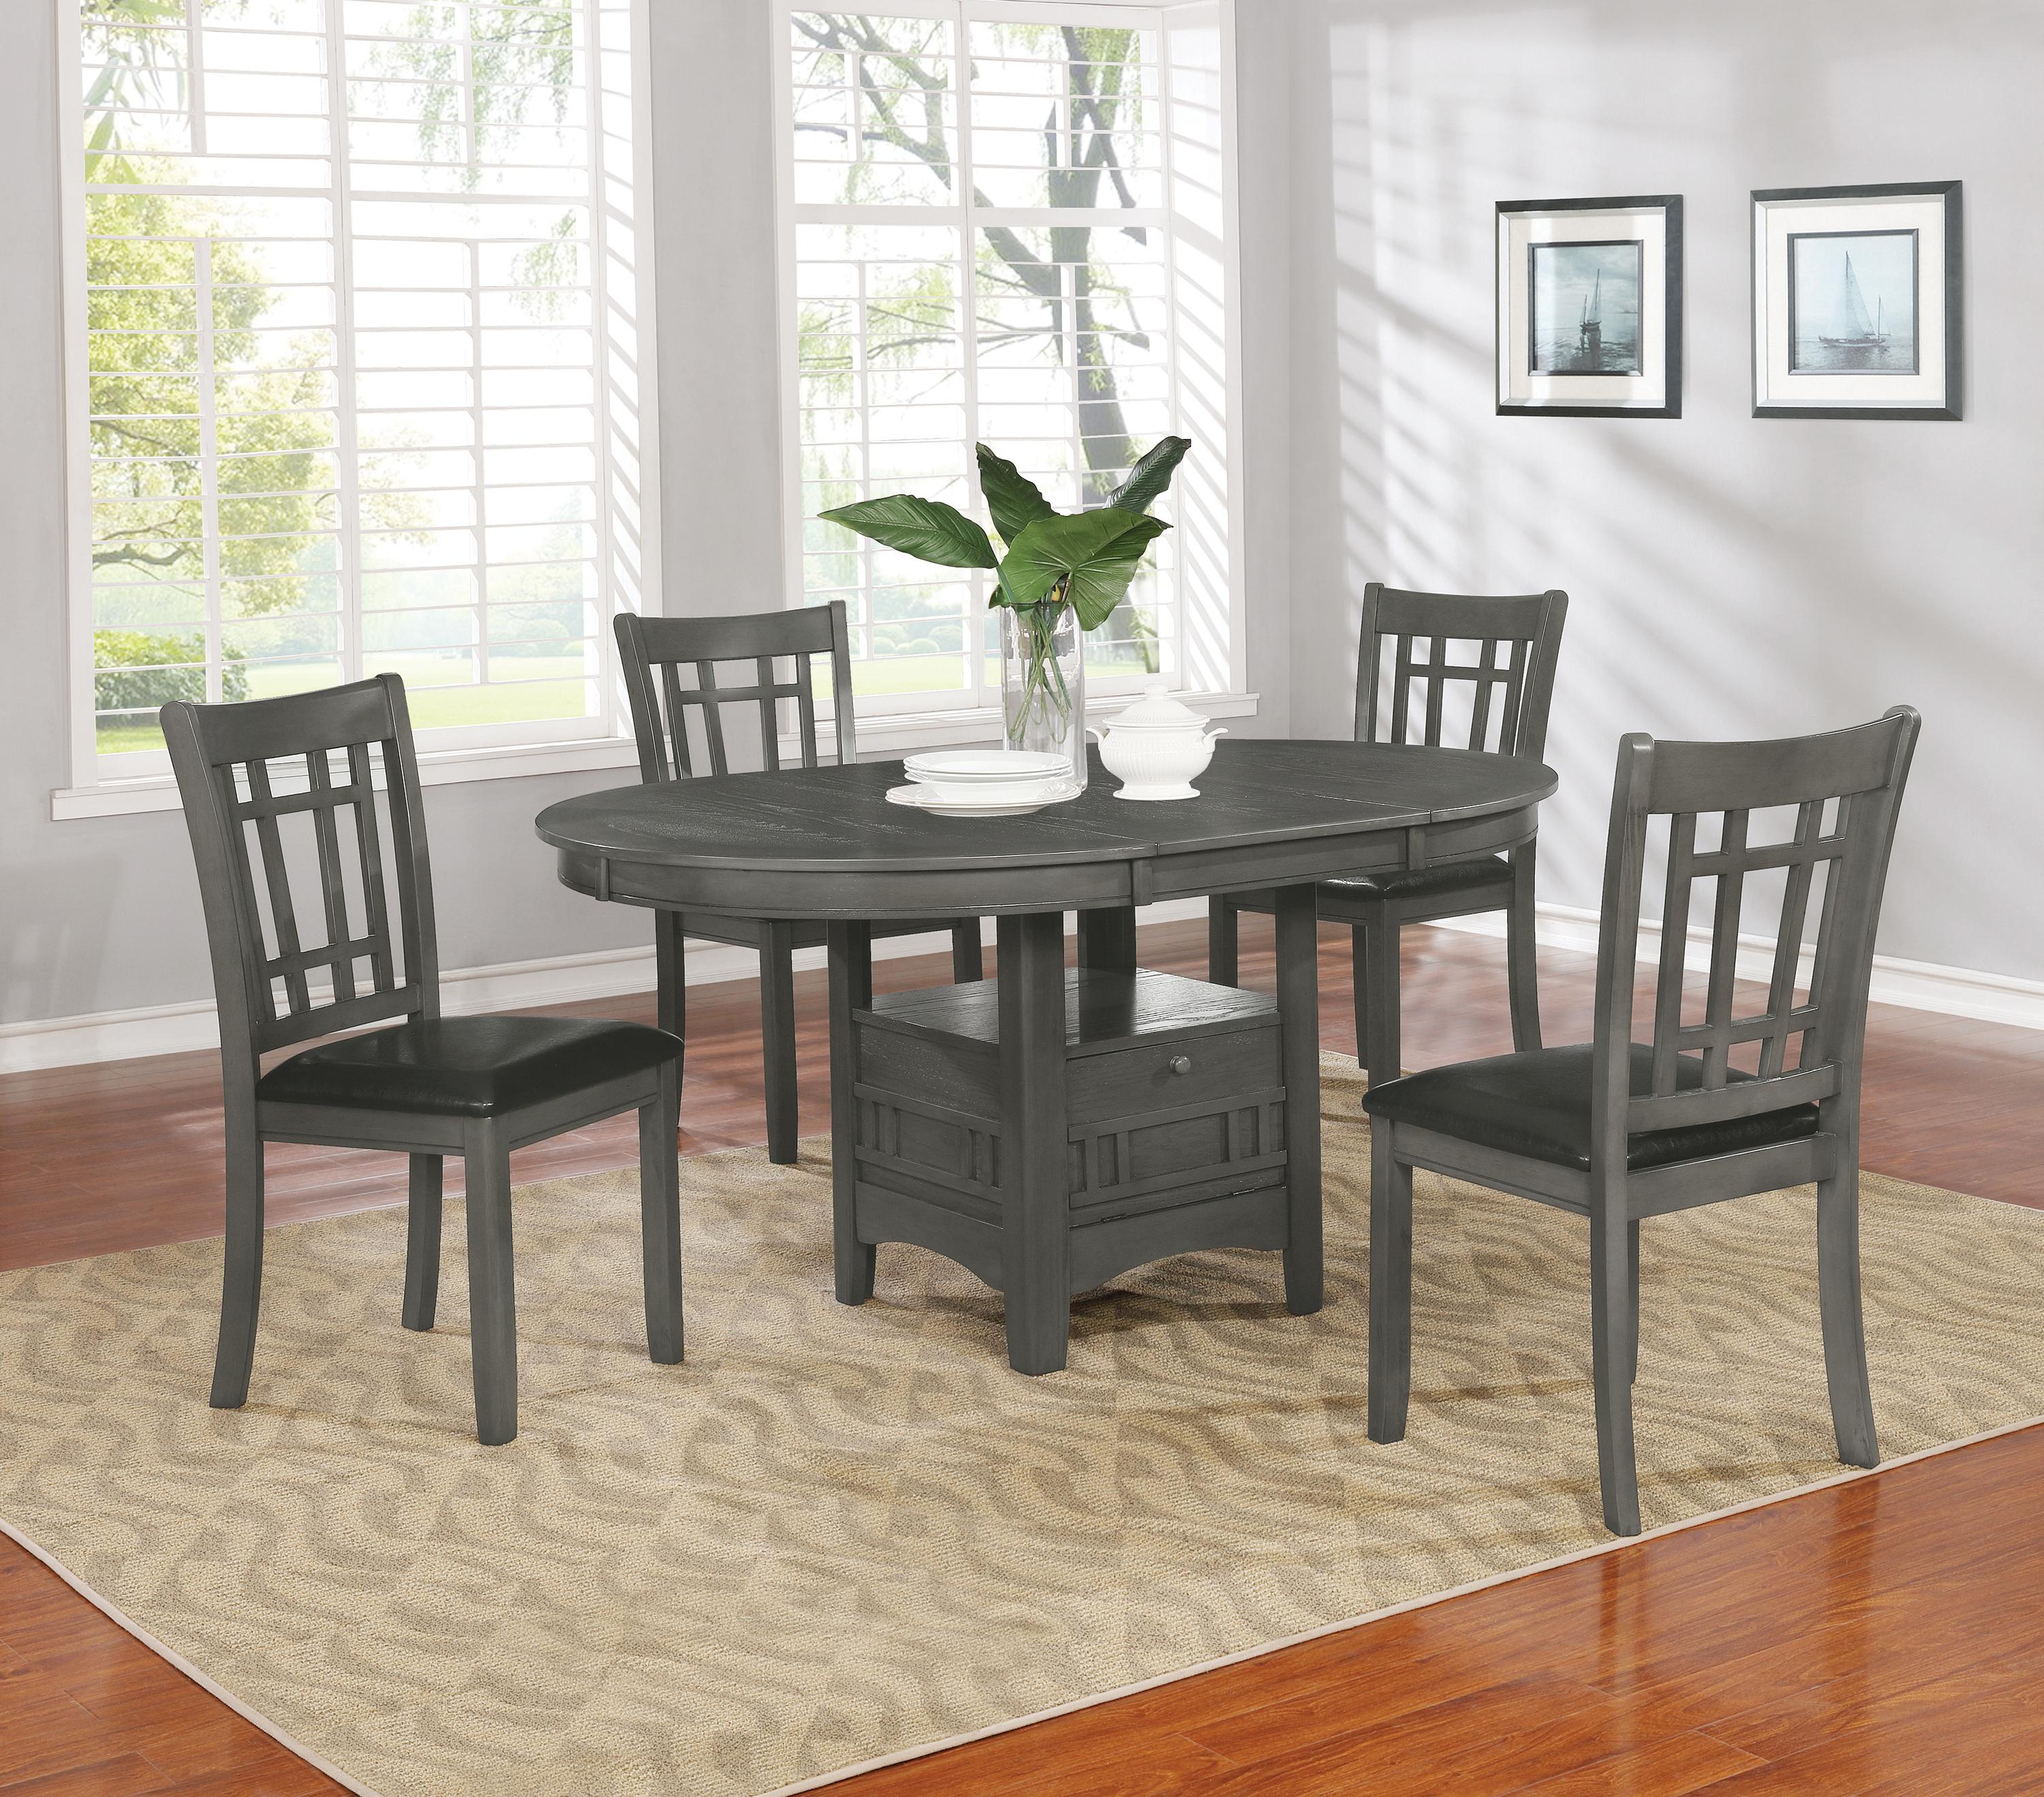 Transitional Dining Room Set 108211-S5 Lavon 108211-S5 in Gray 